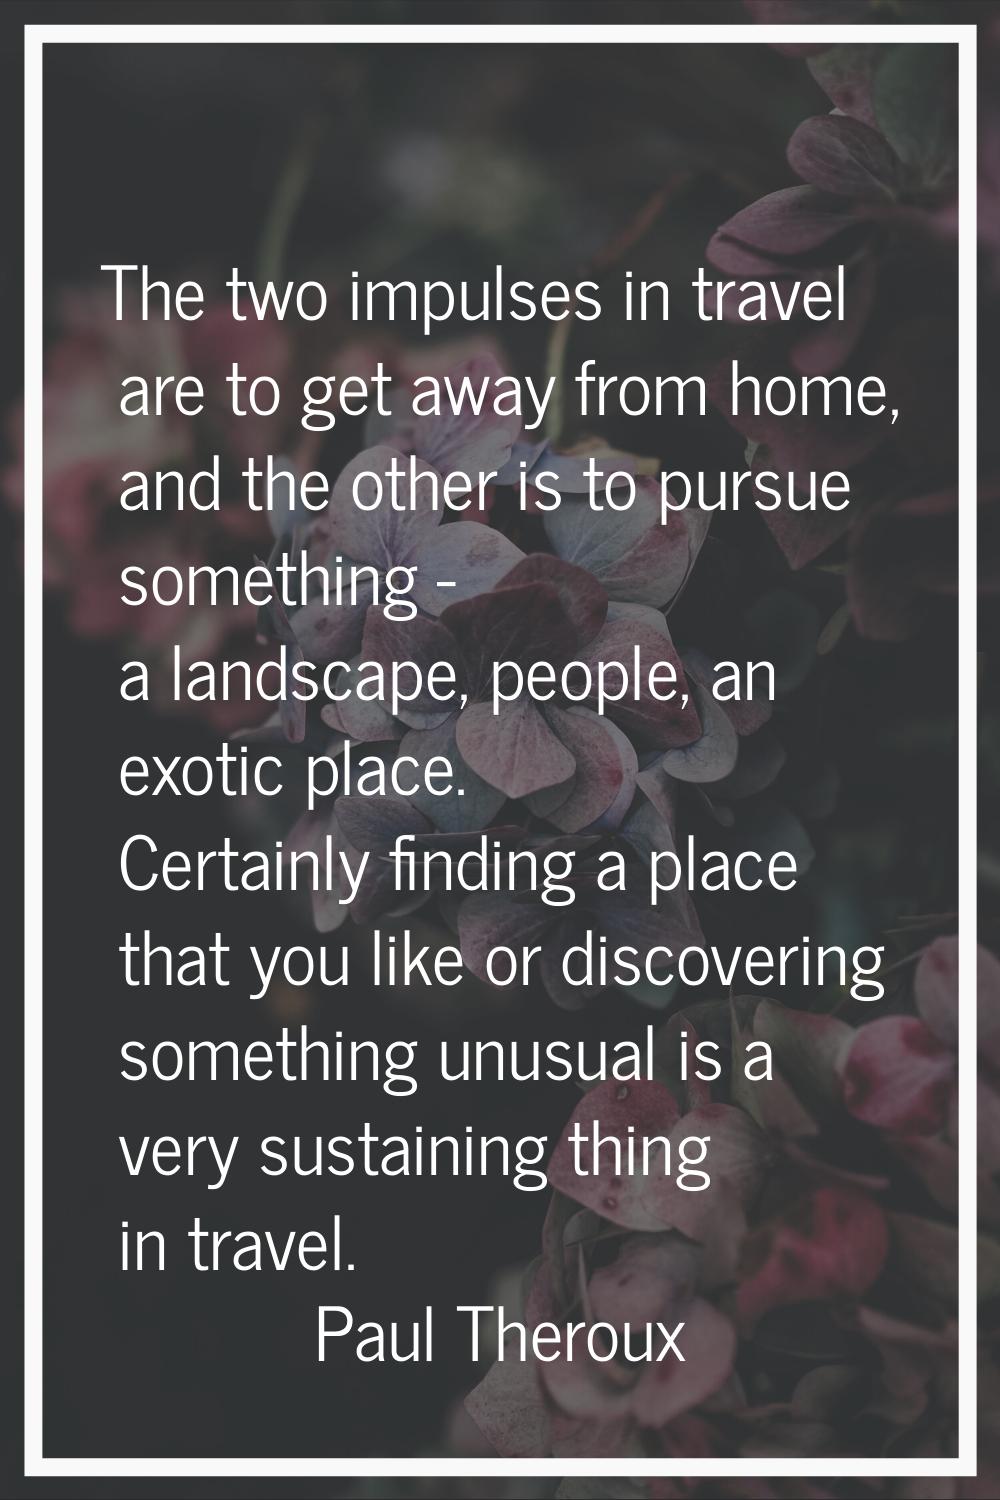 The two impulses in travel are to get away from home, and the other is to pursue something - a land